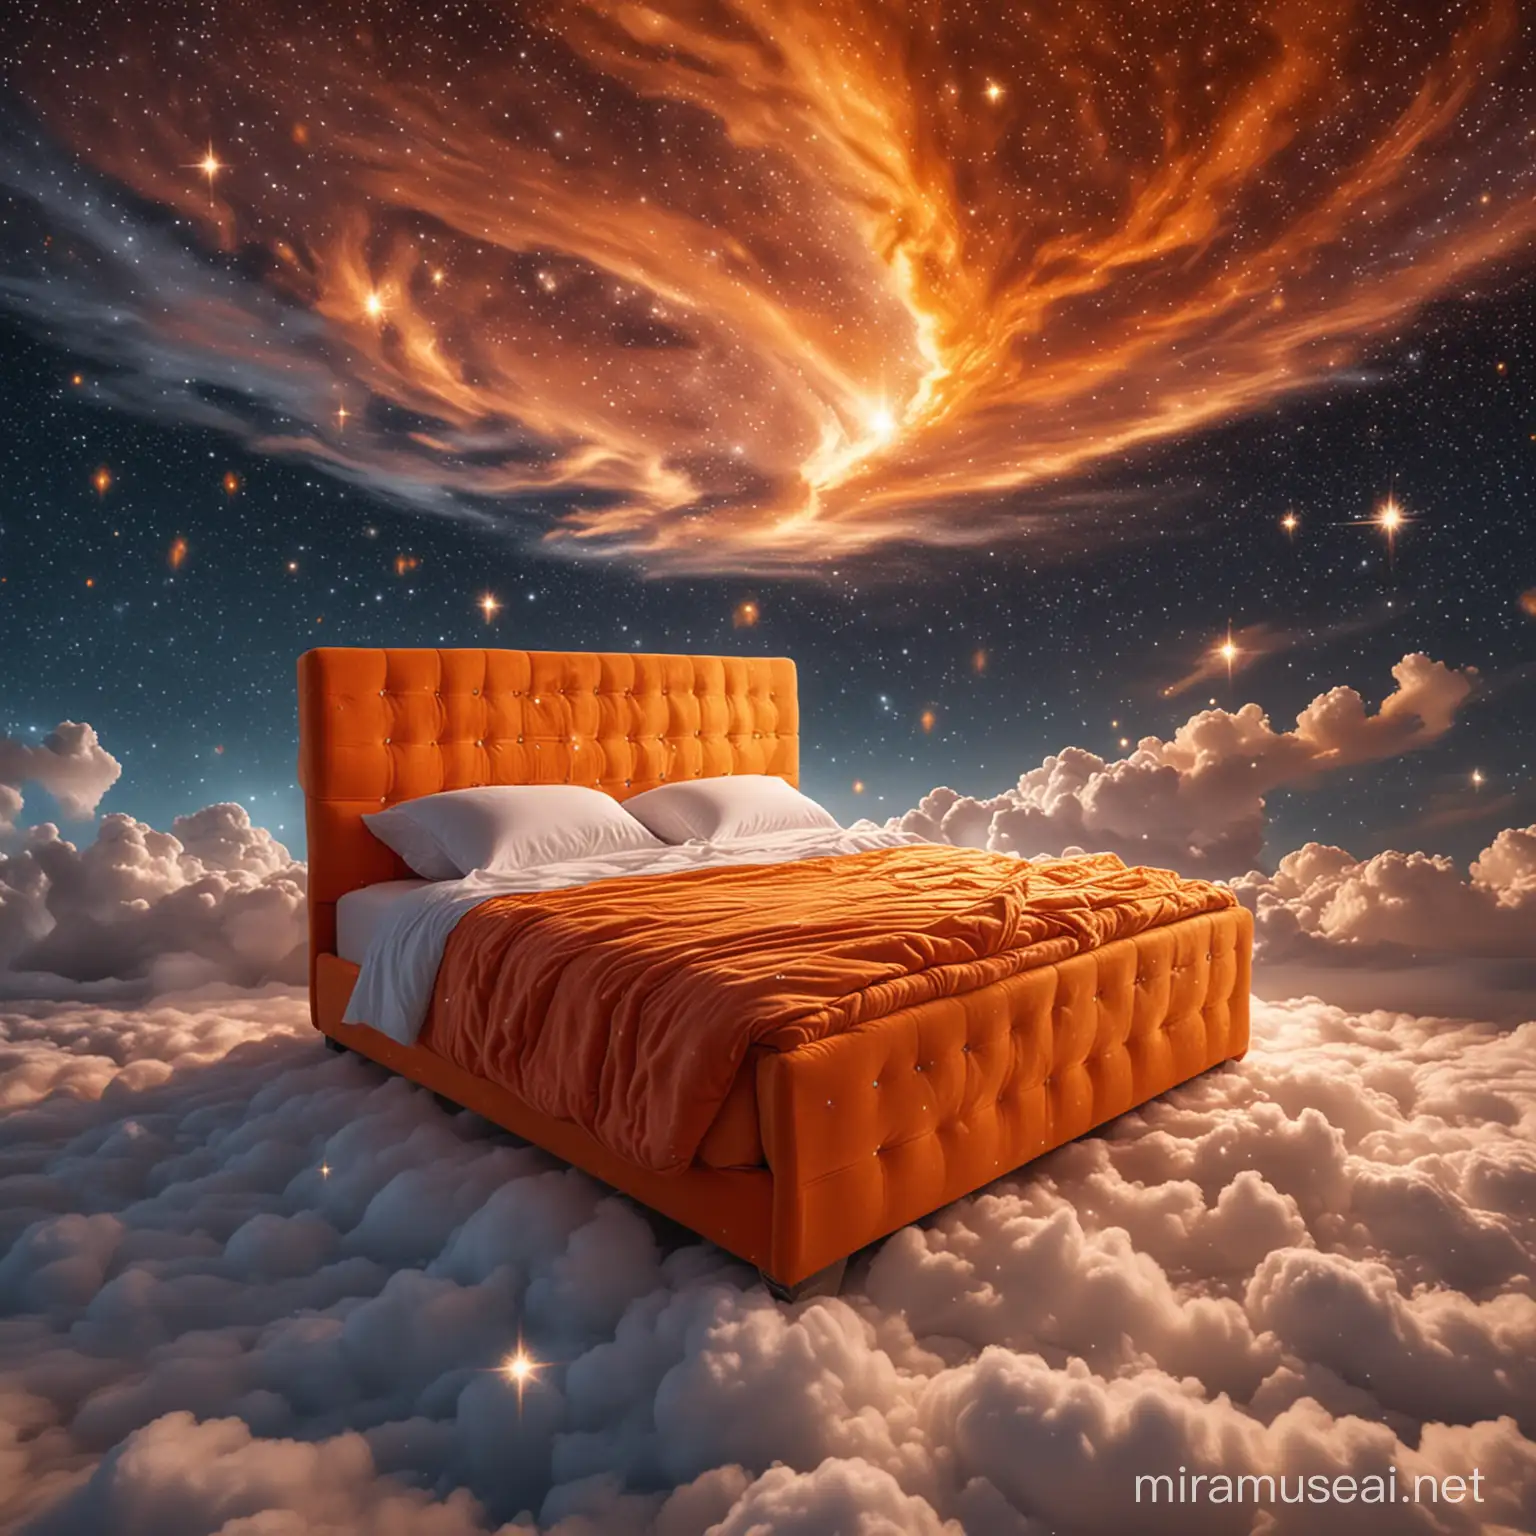 A beautiful, comfortable orange bed covered all over with diamonds, among the stars in the sky with clouds